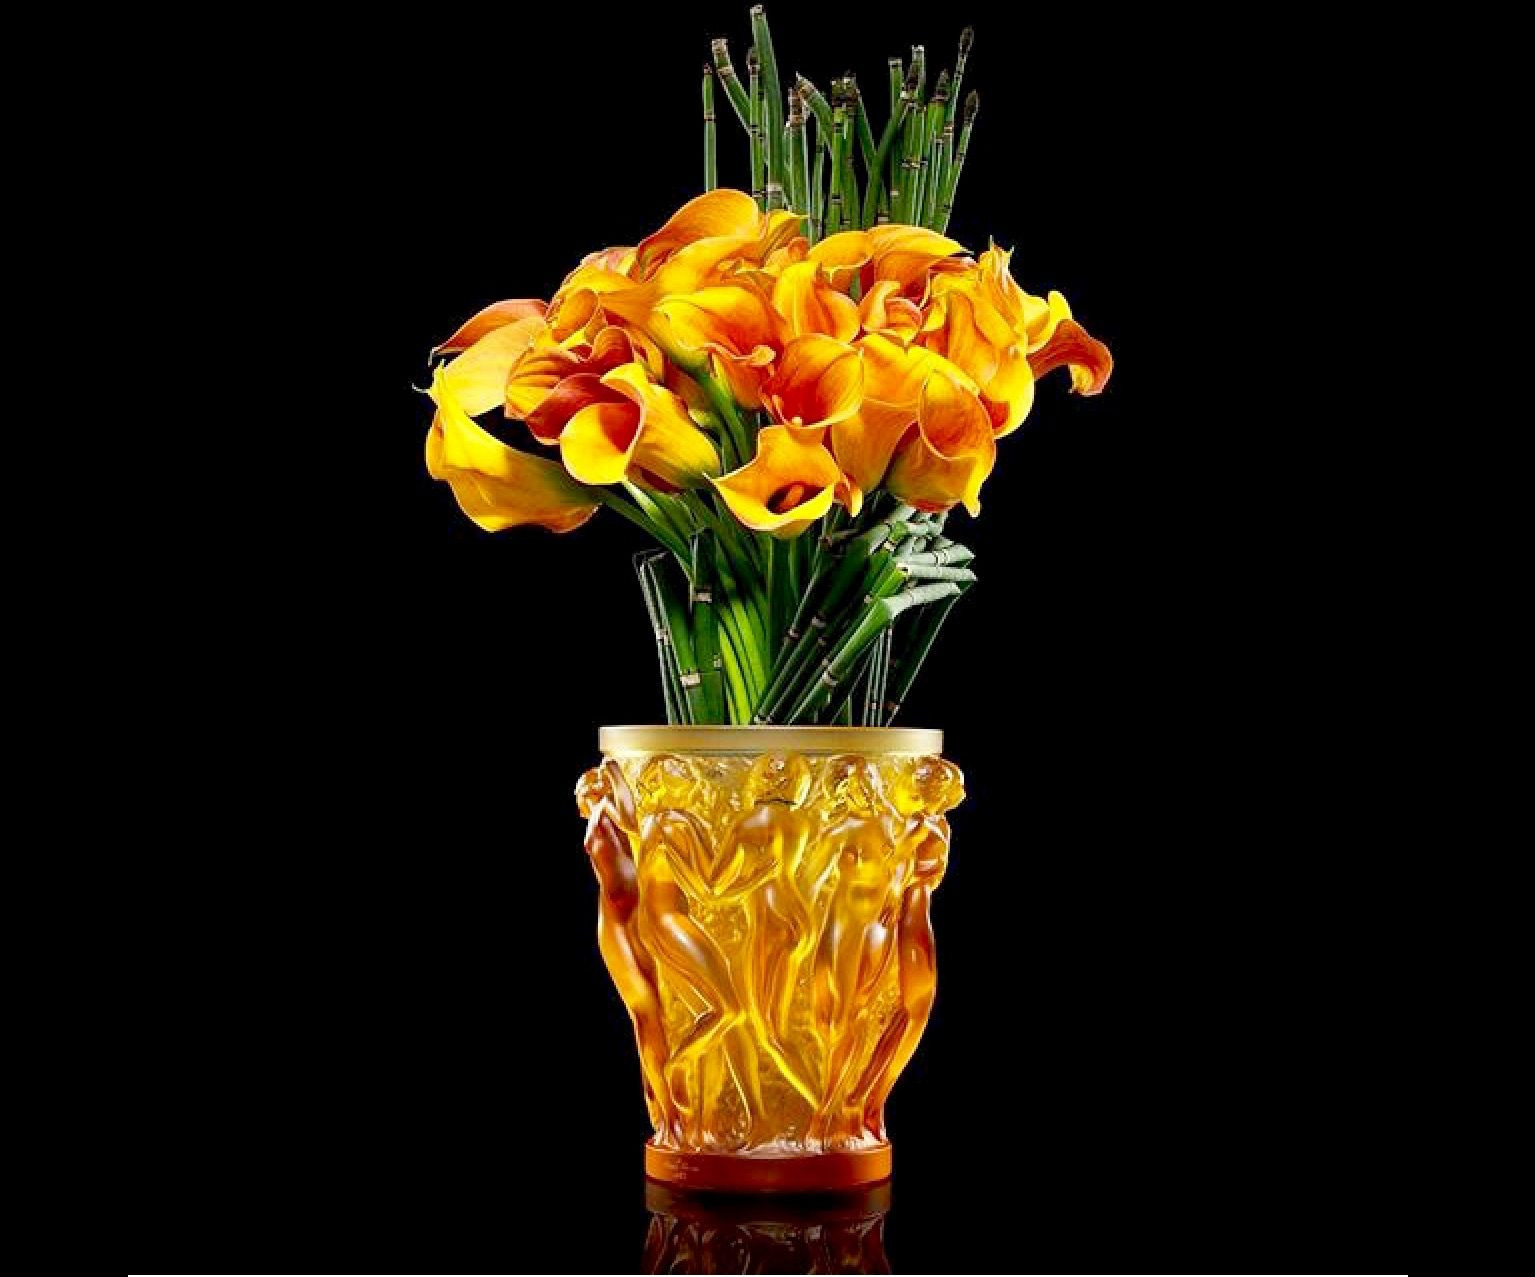 27 Great Antique Hyacinth Vases for Sale 2023 free download antique hyacinth vases for sale of lalique detalhes pinterest in explore crystal vase calla lilies and more